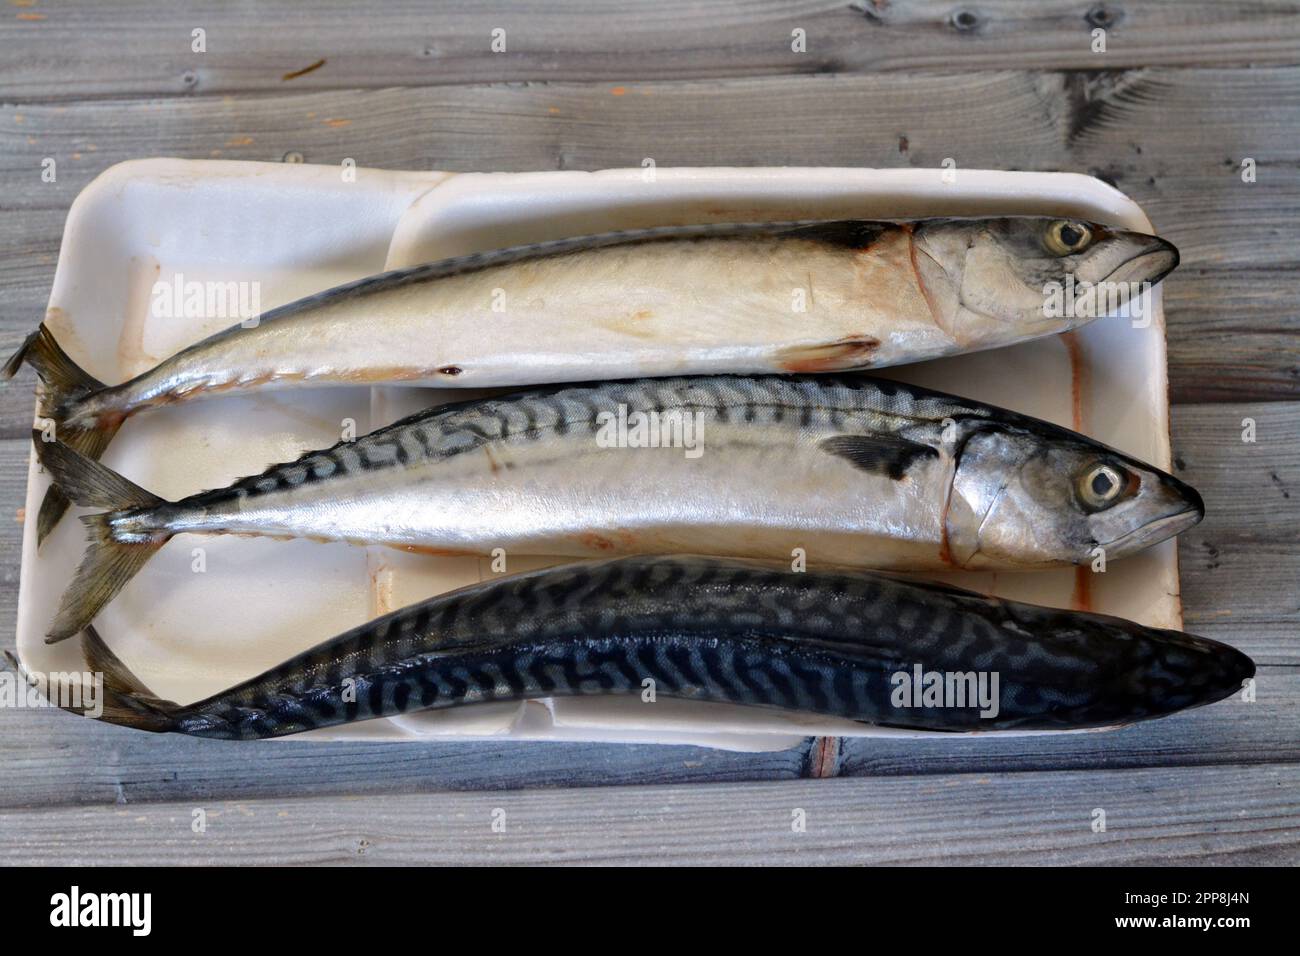 https://c8.alamy.com/comp/2PP8J4N/mackerel-fish-raw-uncooked-different-species-of-pelagic-fish-mostly-from-the-family-scombridae-mackerel-species-typically-have-deeply-forked-tails-2PP8J4N.jpg